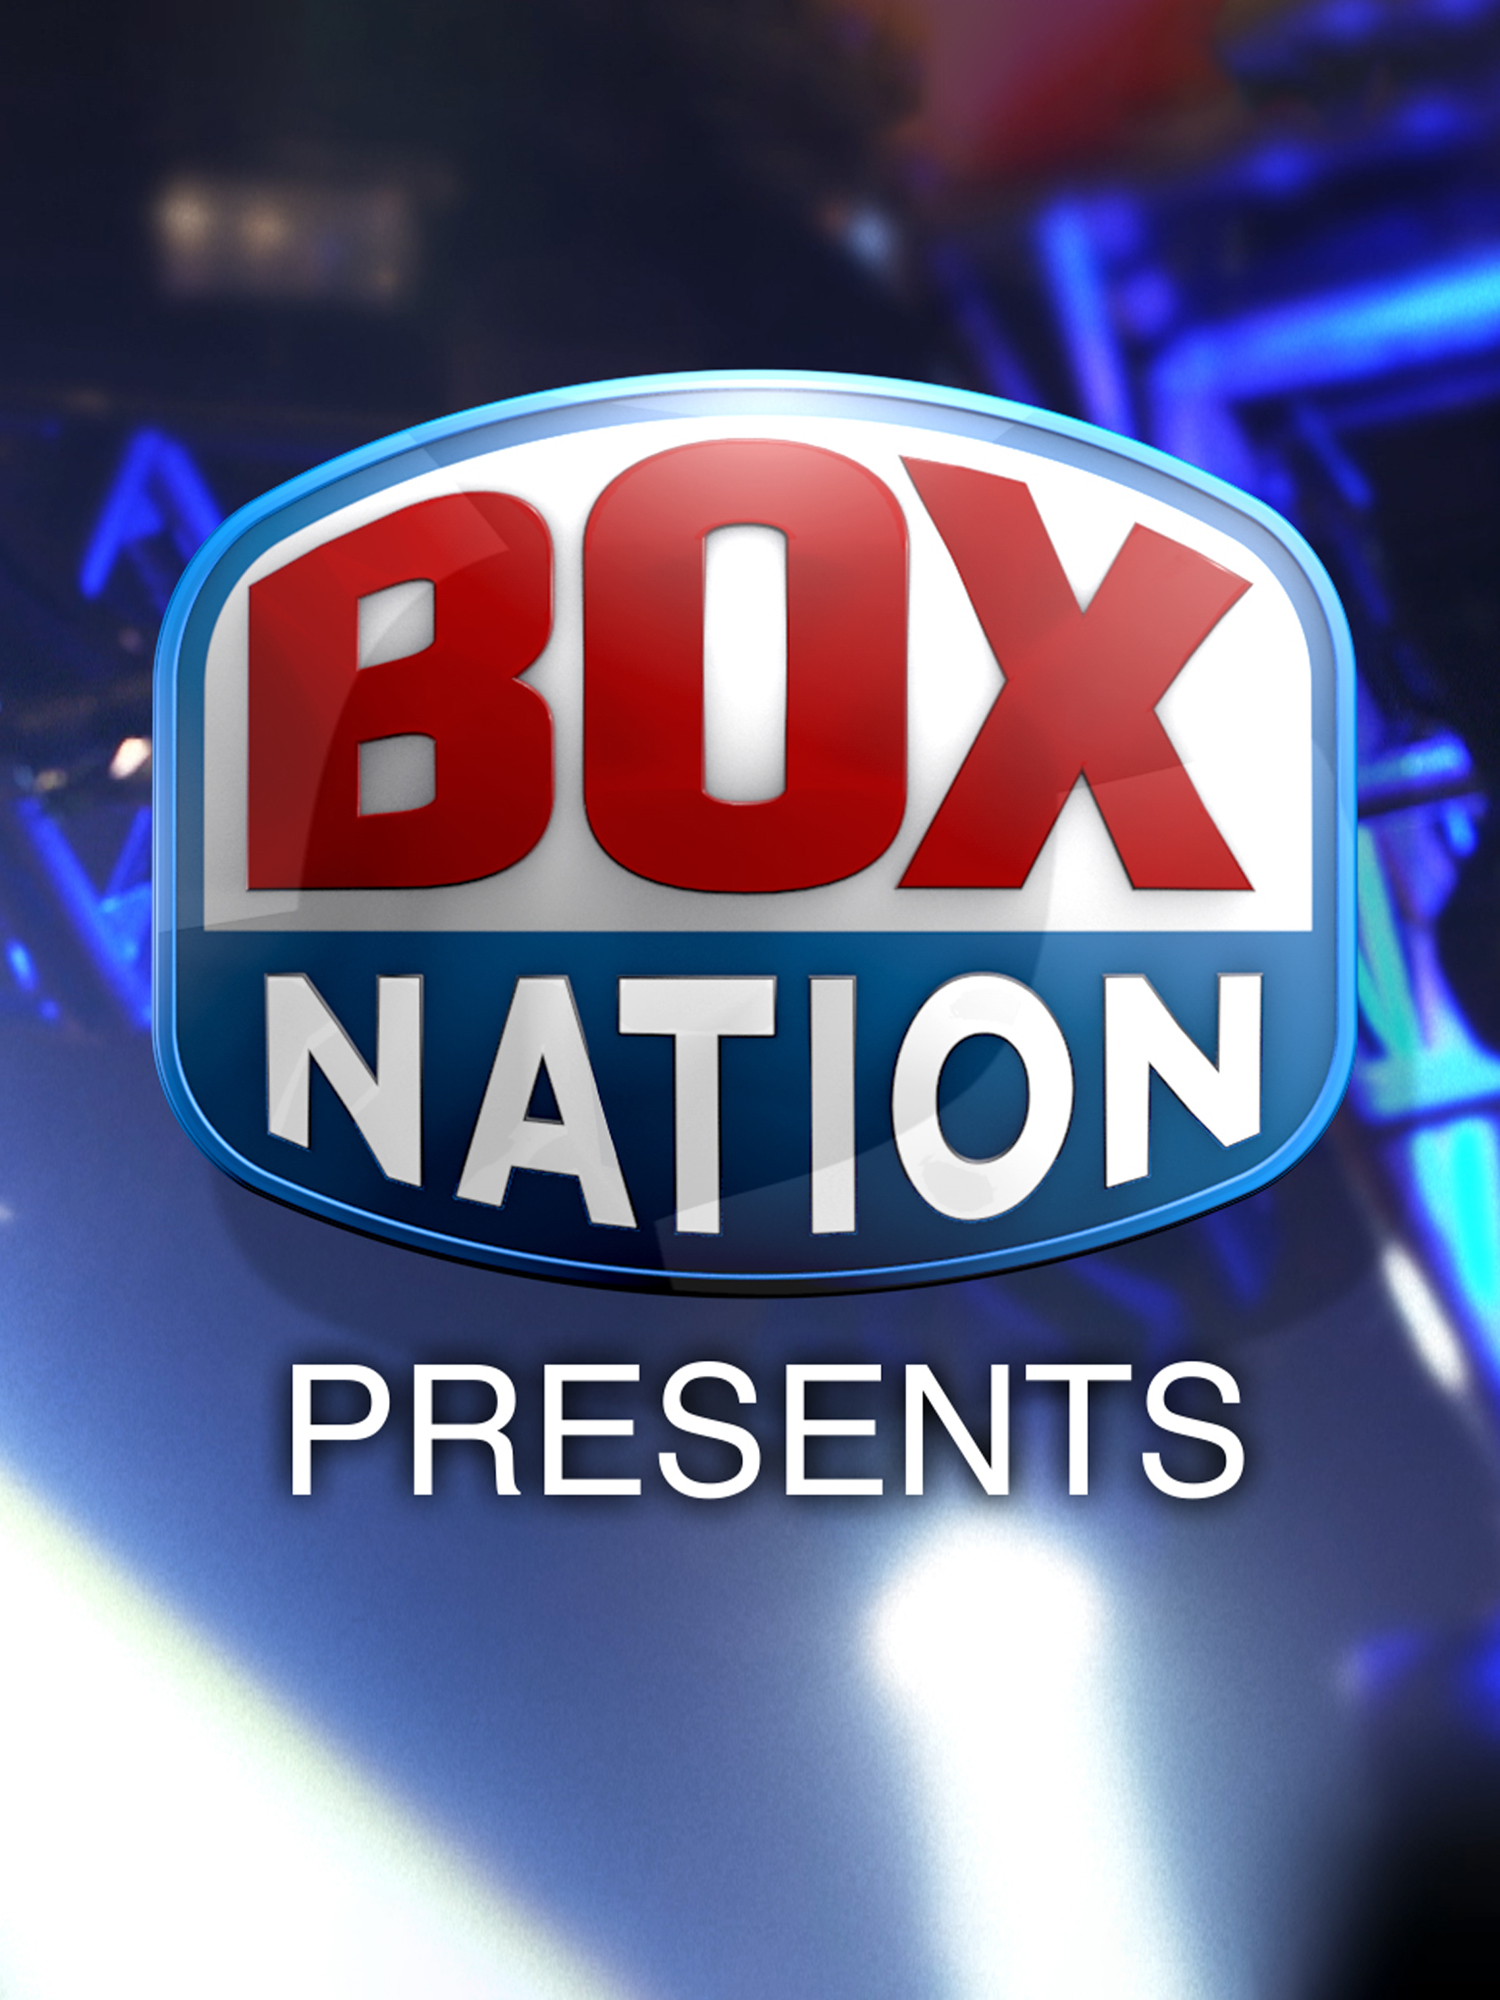 BoxNation Presents - Where to Watch and Stream - TV Guide